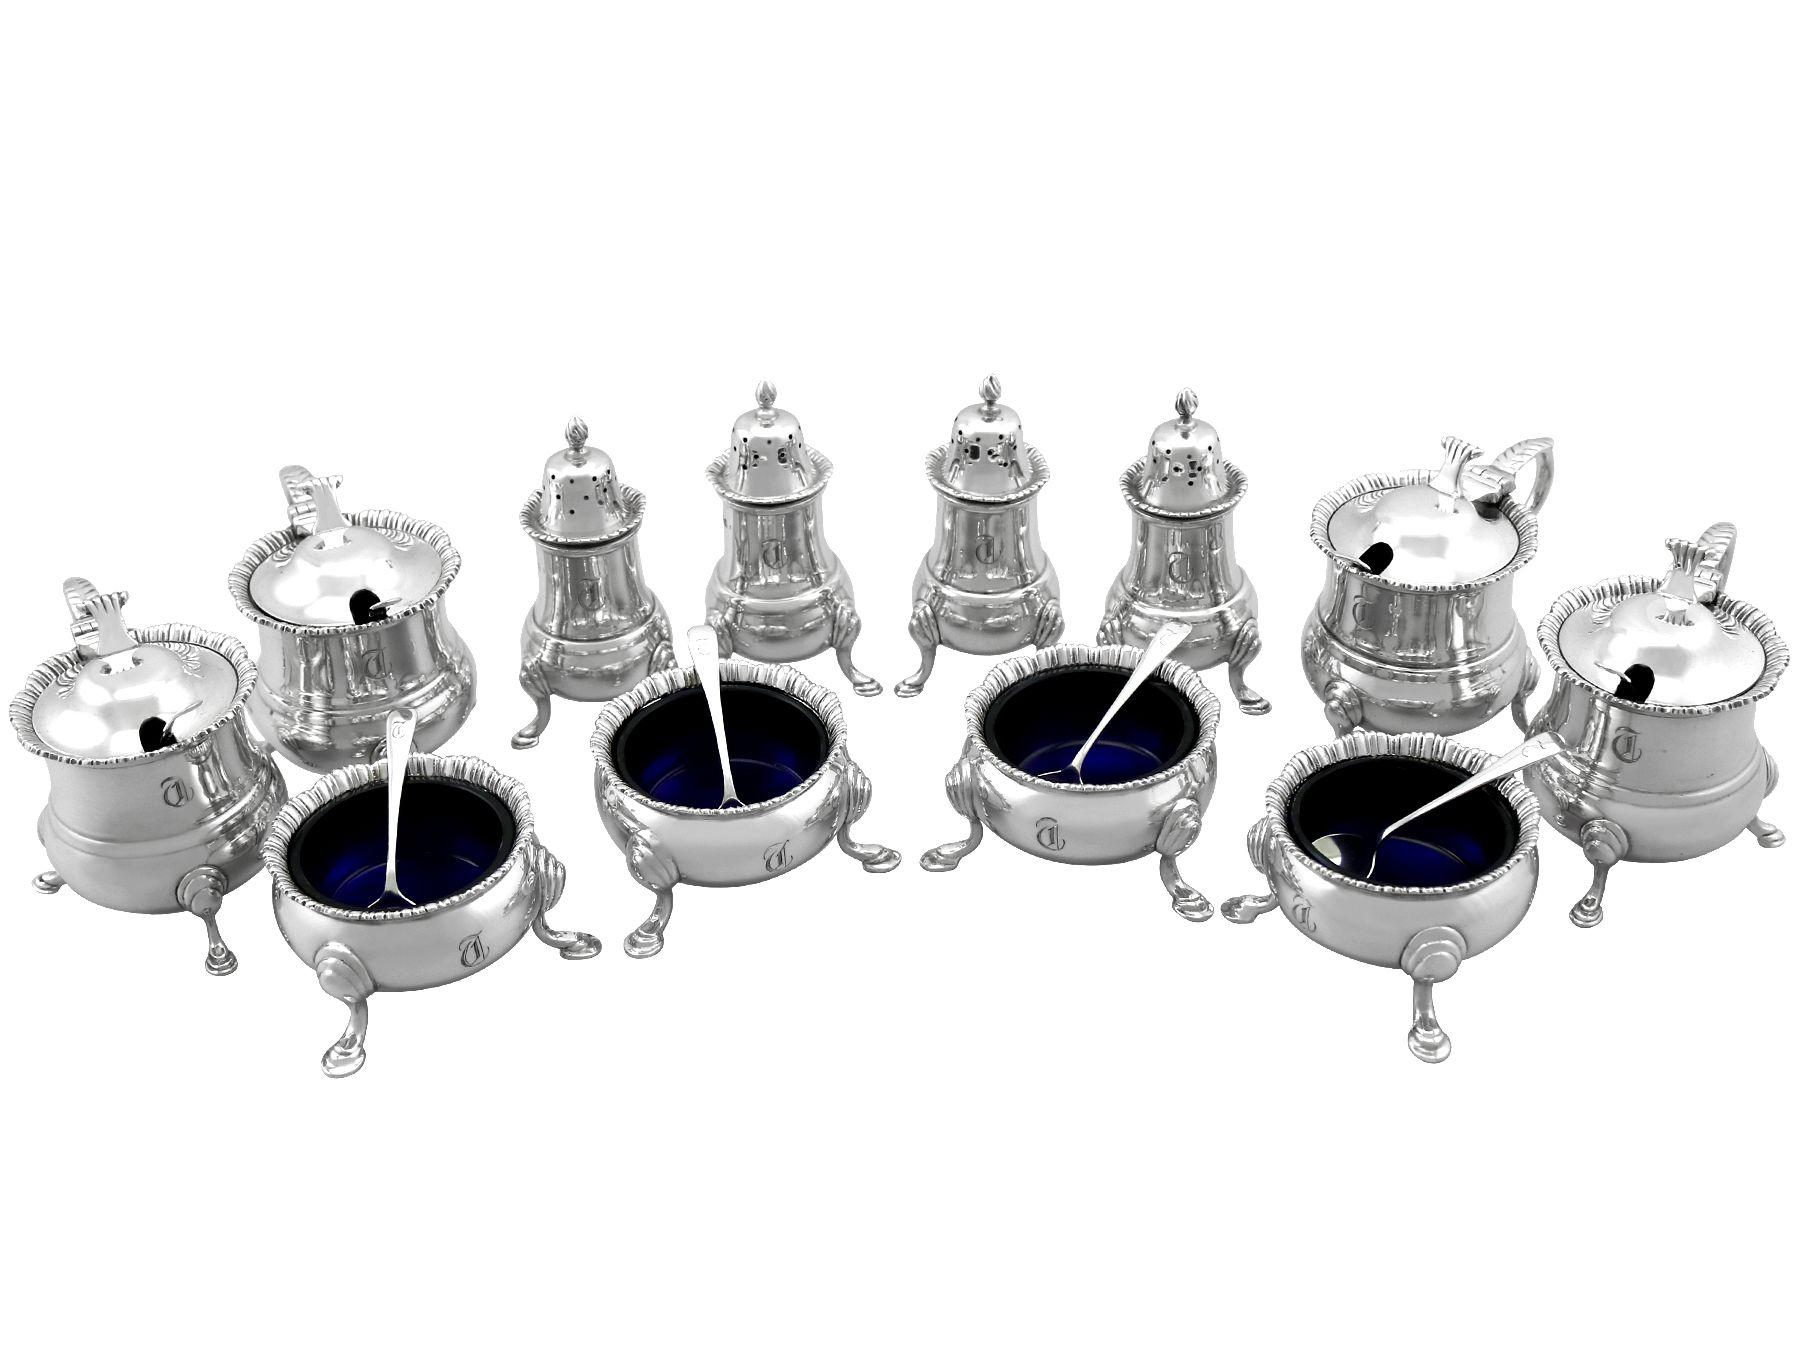 An exceptional, fine and impressive, comprehensive antique George V English sterling silver twelve piece condiment / cruet set - boxed; an addition to our dining silverware collection

This exceptional antique George V twelve piece boxed silver